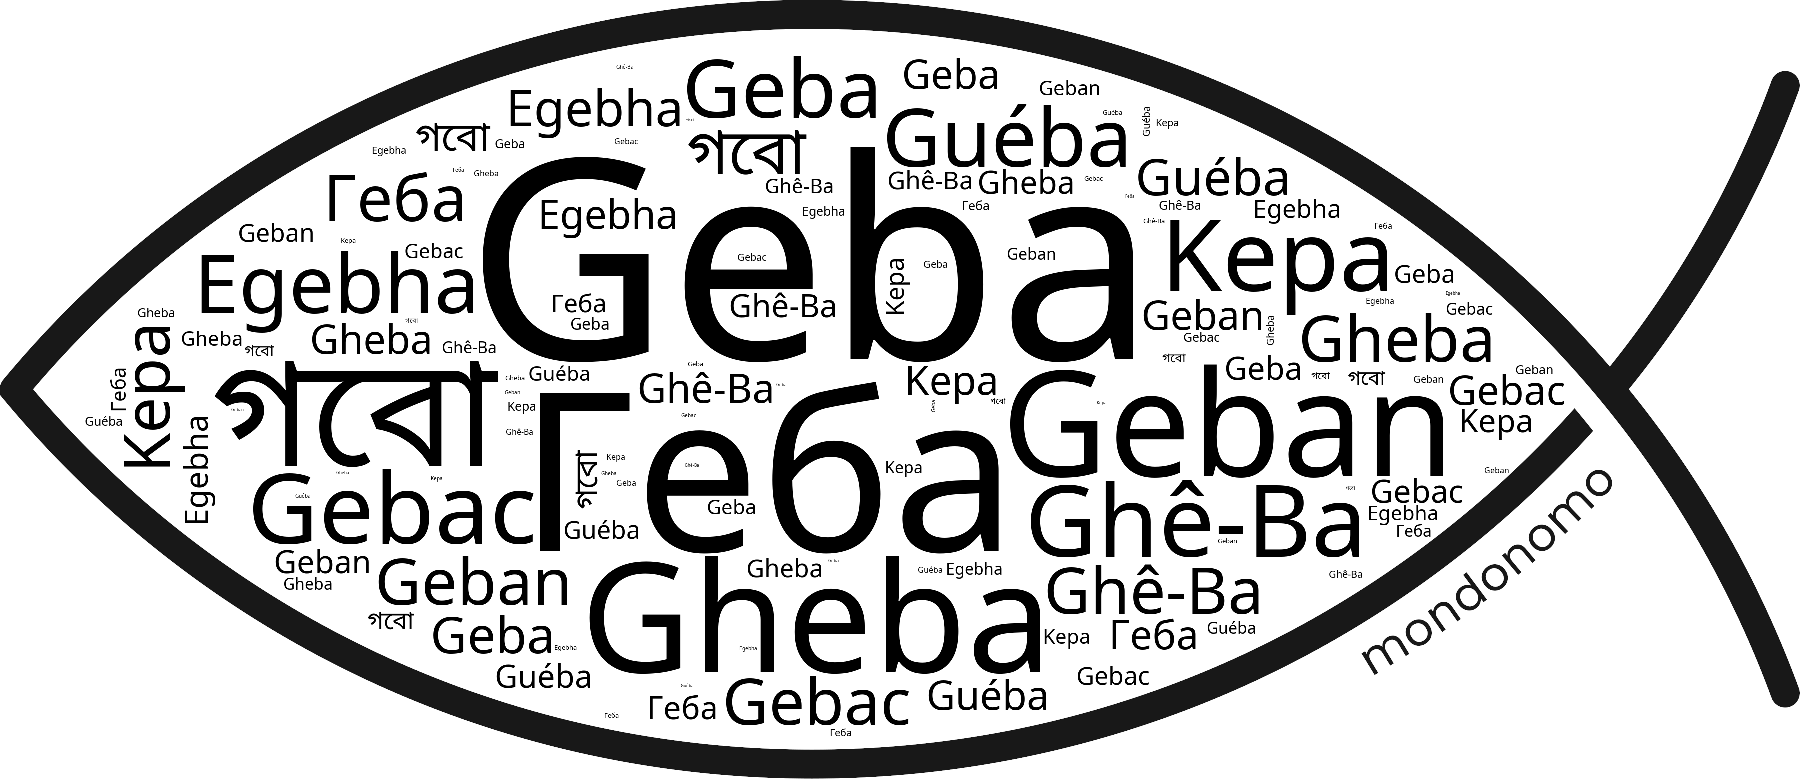 Name Geba in the world's Bibles